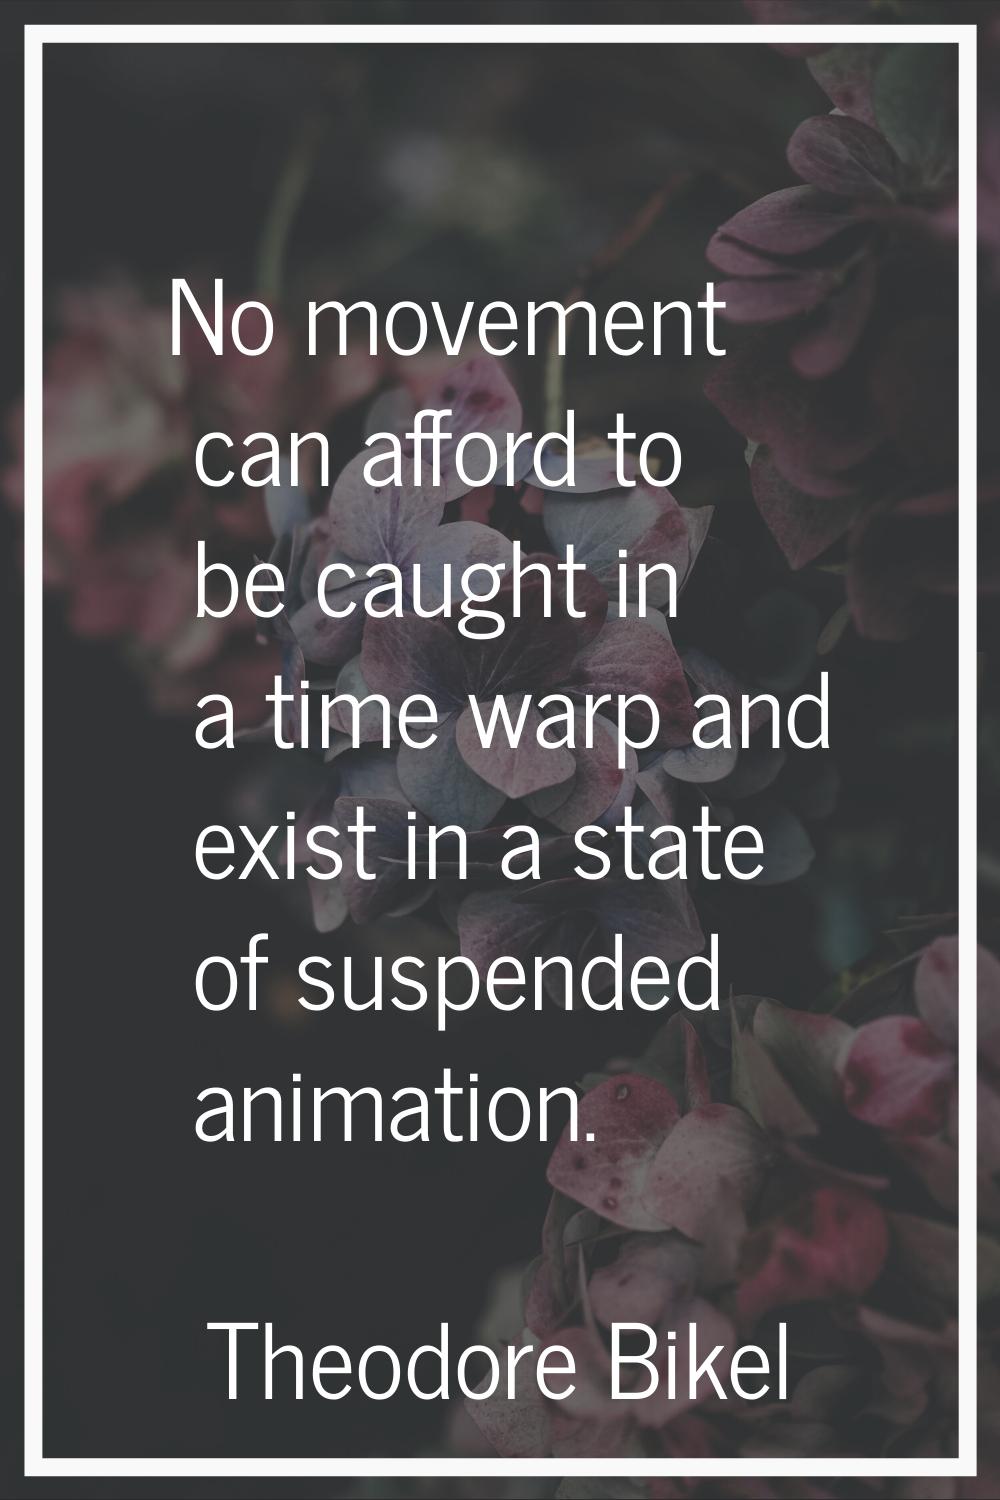 No movement can afford to be caught in a time warp and exist in a state of suspended animation.